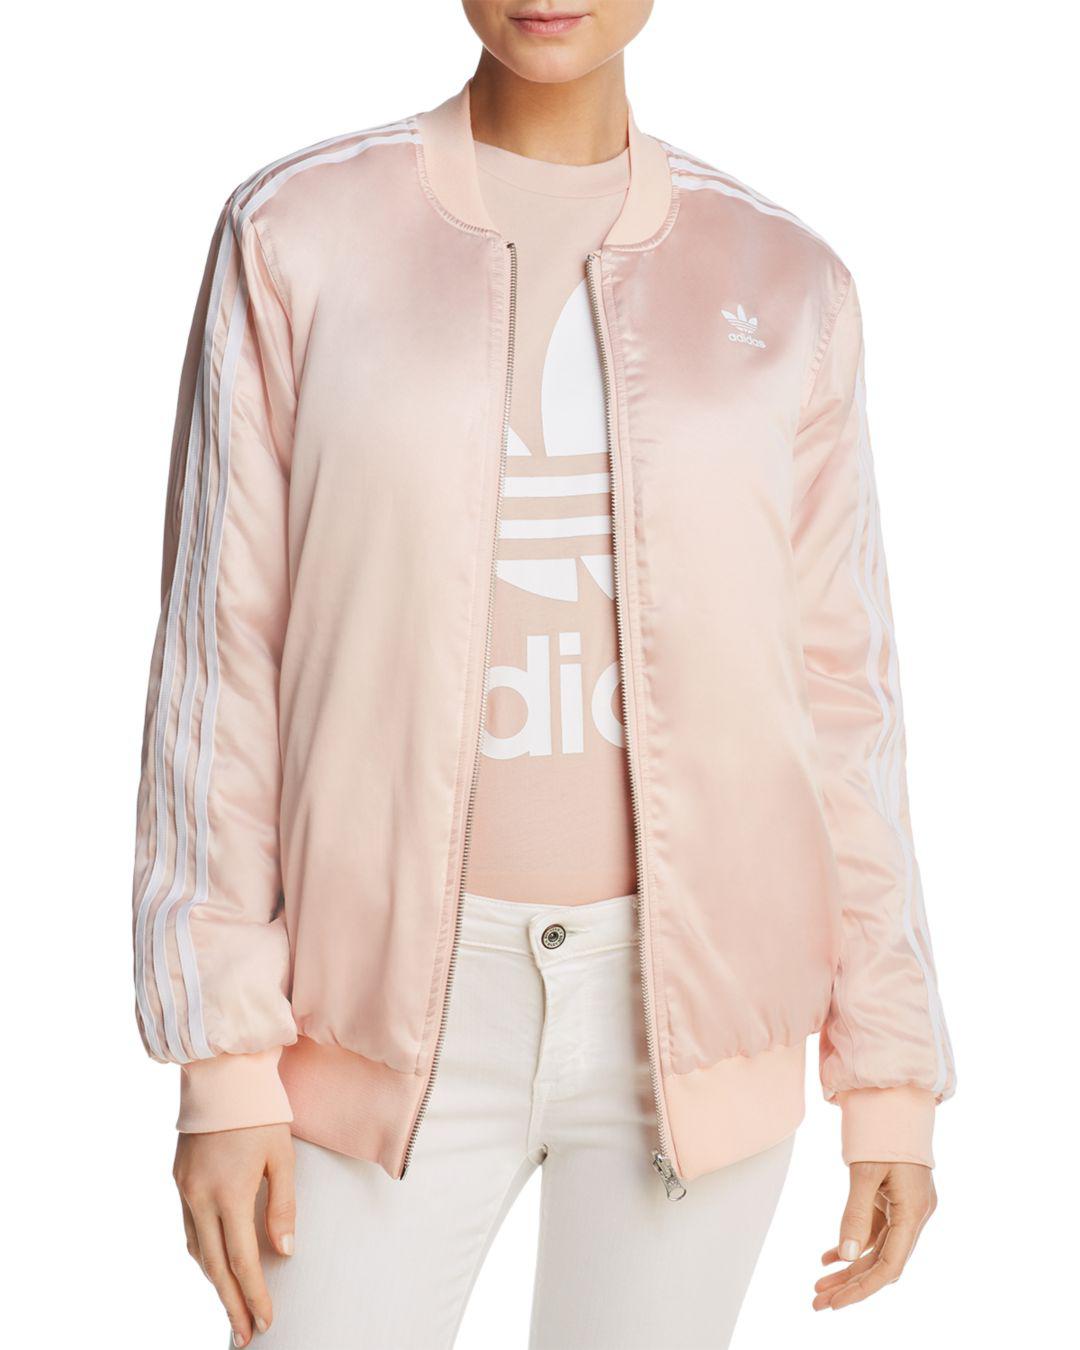 adidas Originals Reversible Floral Print Bomber Jacket in Pink | Lyst Canada